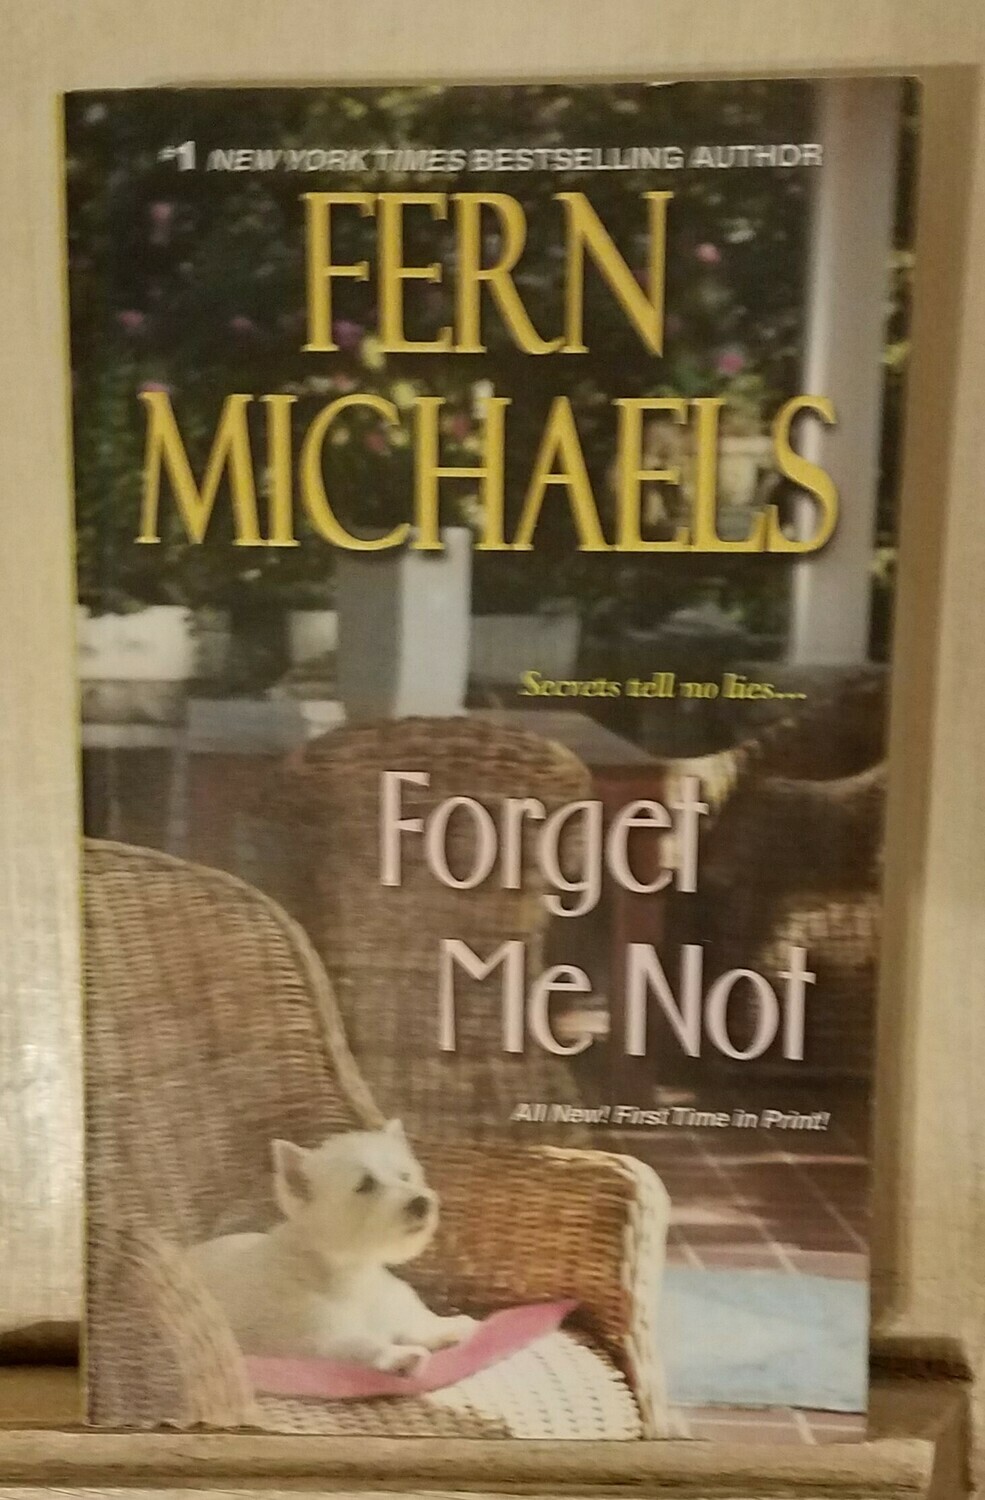 Forget Me Not by Fern Michaels